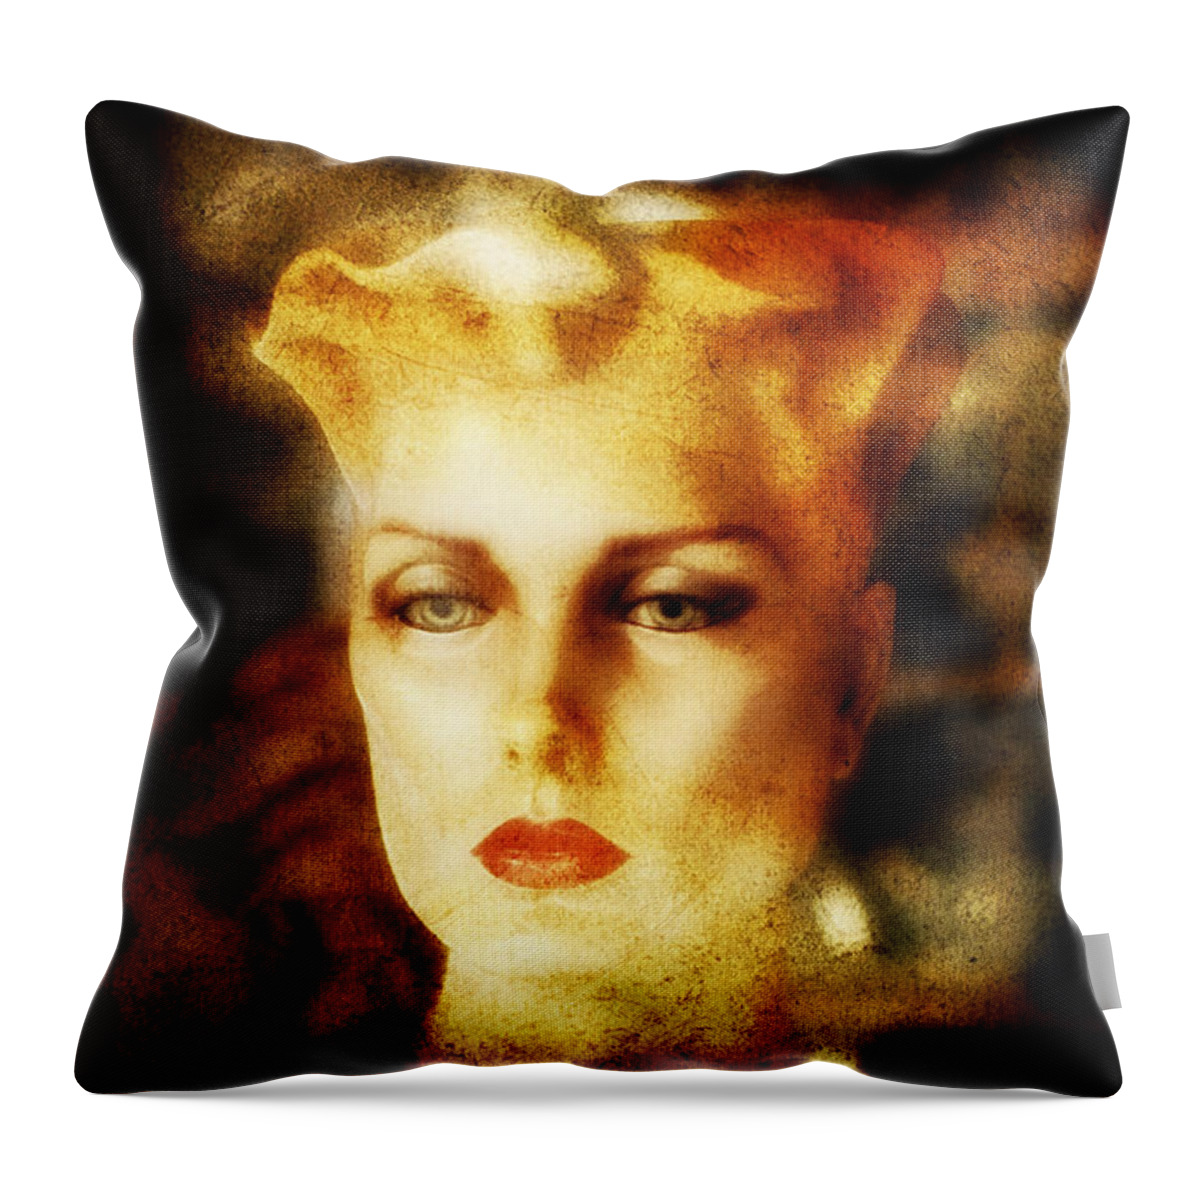 Tranquility Throw Pillow featuring the photograph Misty Woman by Craig J Satterlee